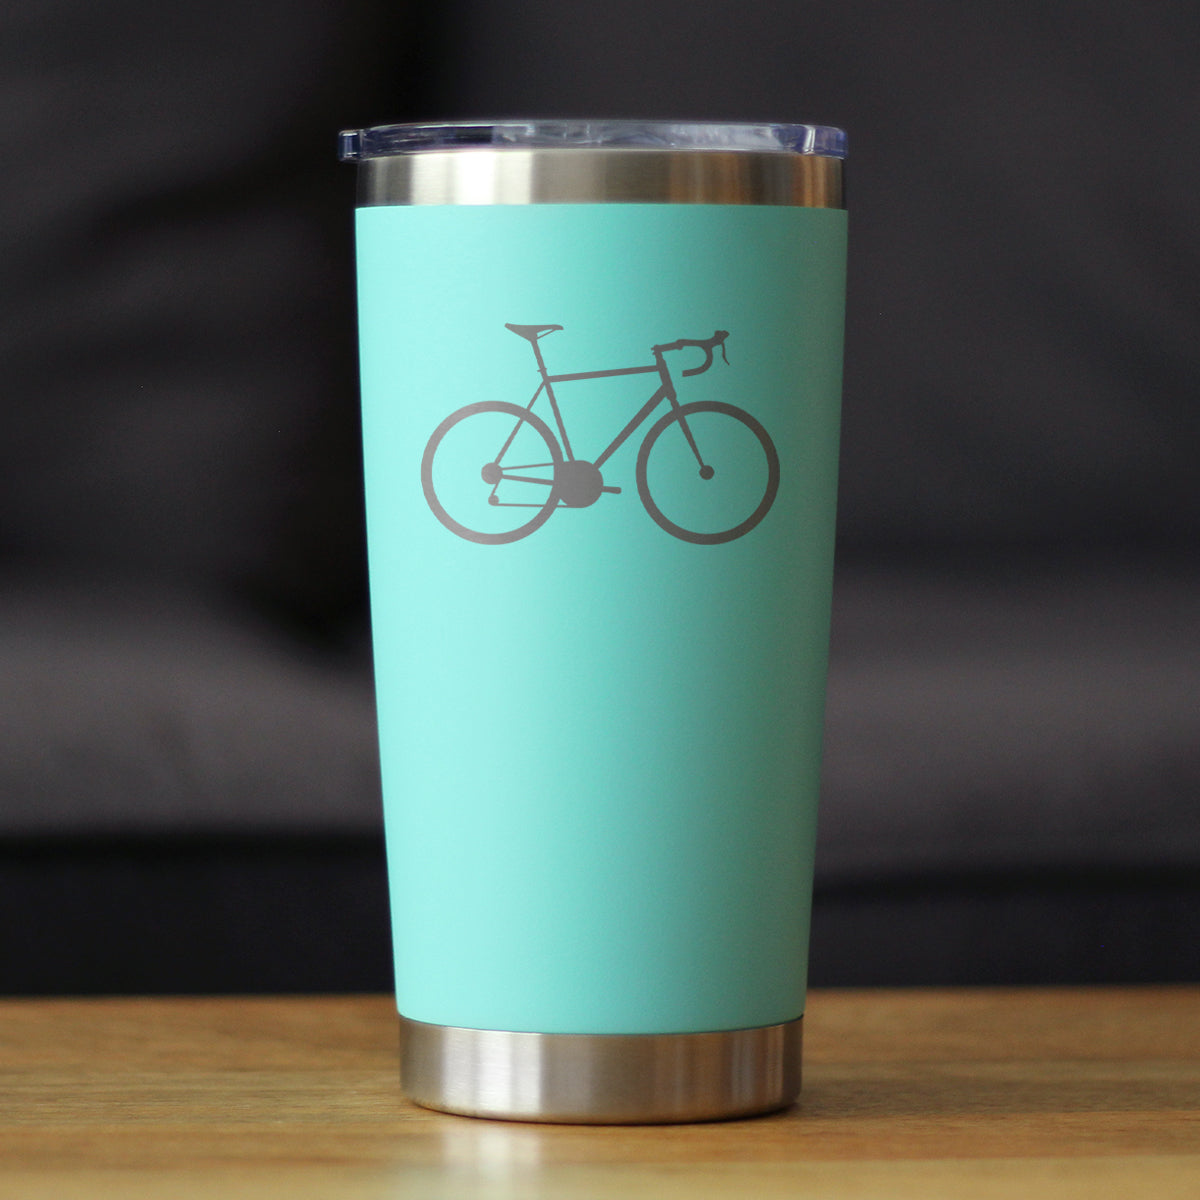 Bicycle - Insulated Coffee Tumbler Cup with Sliding Lid - Stainless Steel Insulated Mug - Unique Road Biking Themed Decor and Gifts for Cyclists